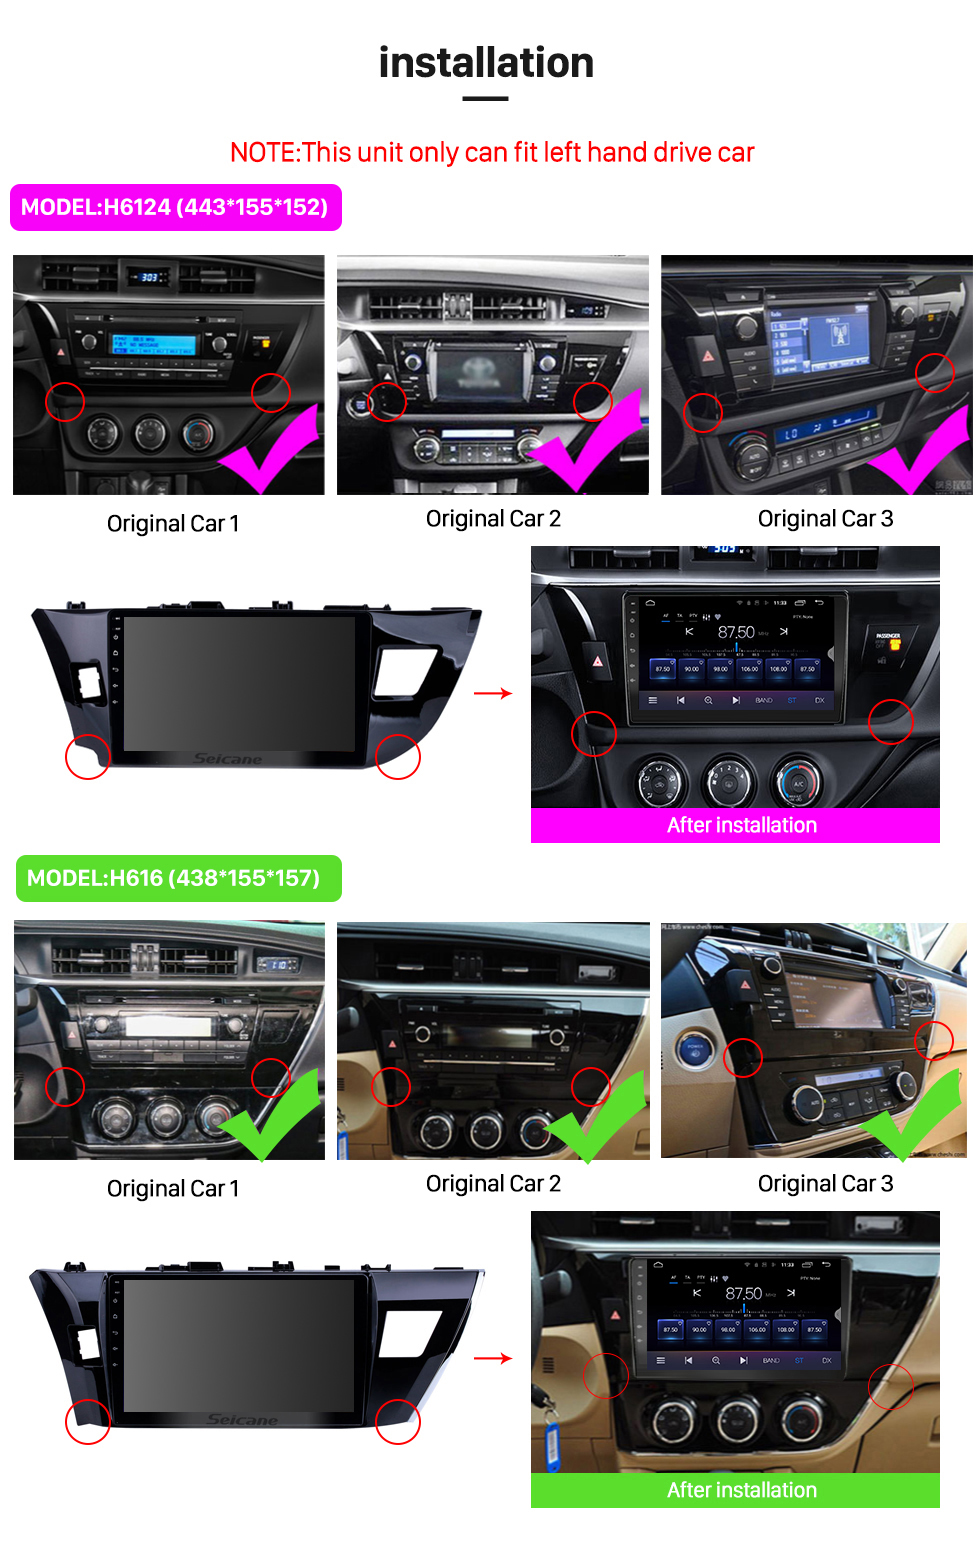 Seicane 10.1 Inch Android 10.0 Touch Screen radio Bluetooth GPS Navigation system For Toyota Corolla 11 2012-2014 2015 2016 E170 E180 Support TPMS DVR OBD II USB SD  WiFi Rear camera Steering Wheel Control HD 1080P Video AUX